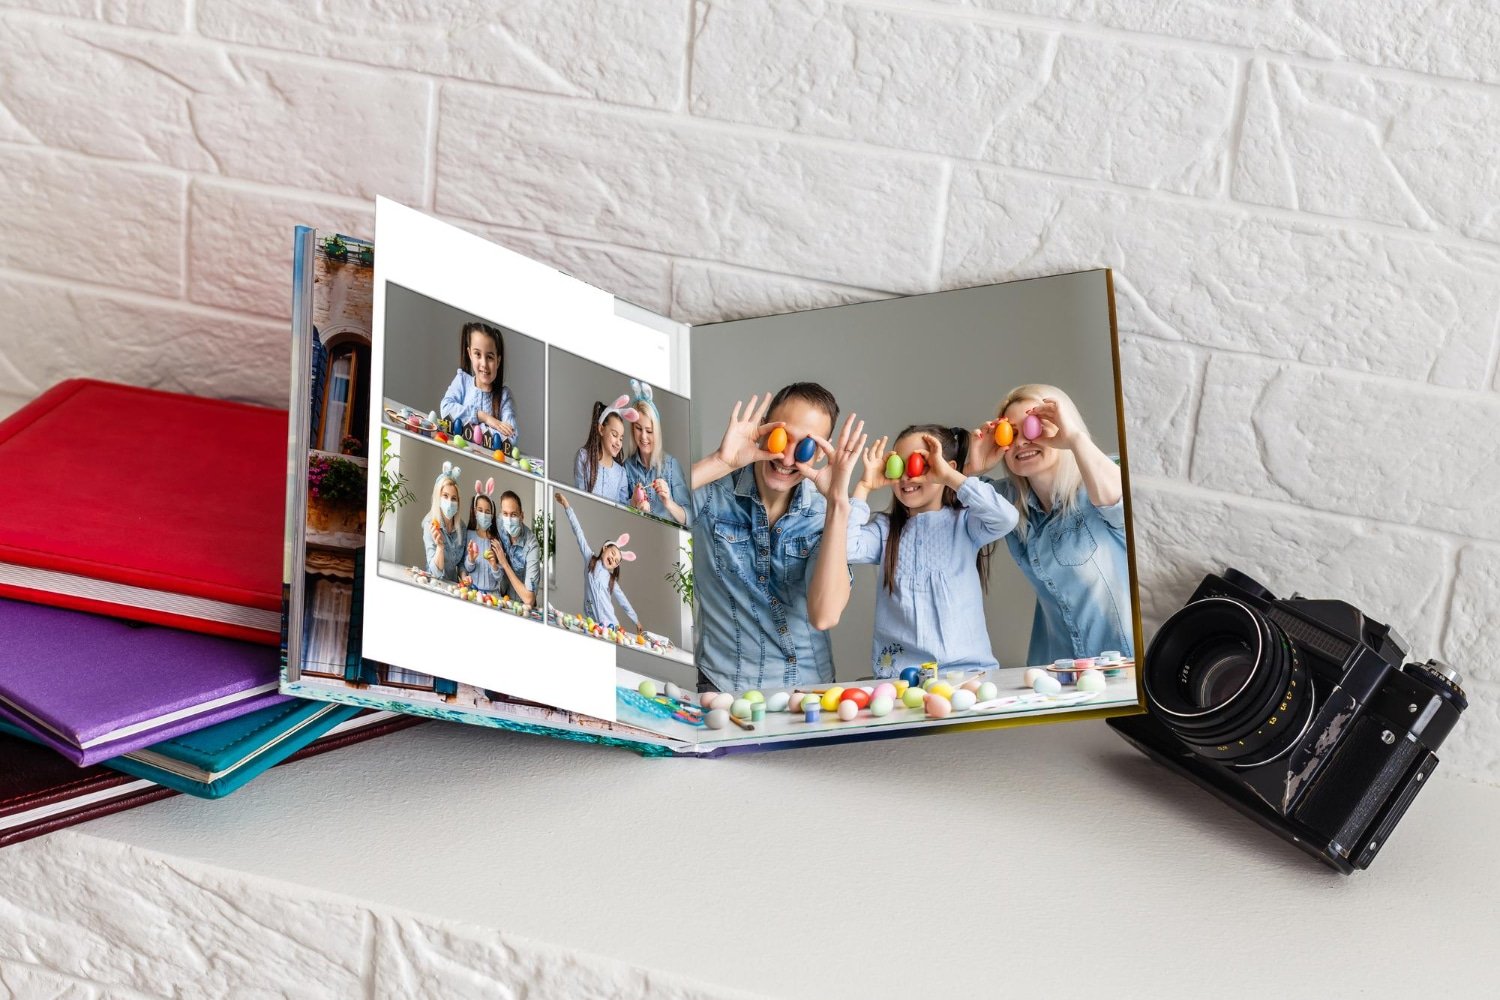 You are currently viewing Capturing Memories: Why mpix.com Is Your Best Choice for Photo Printing